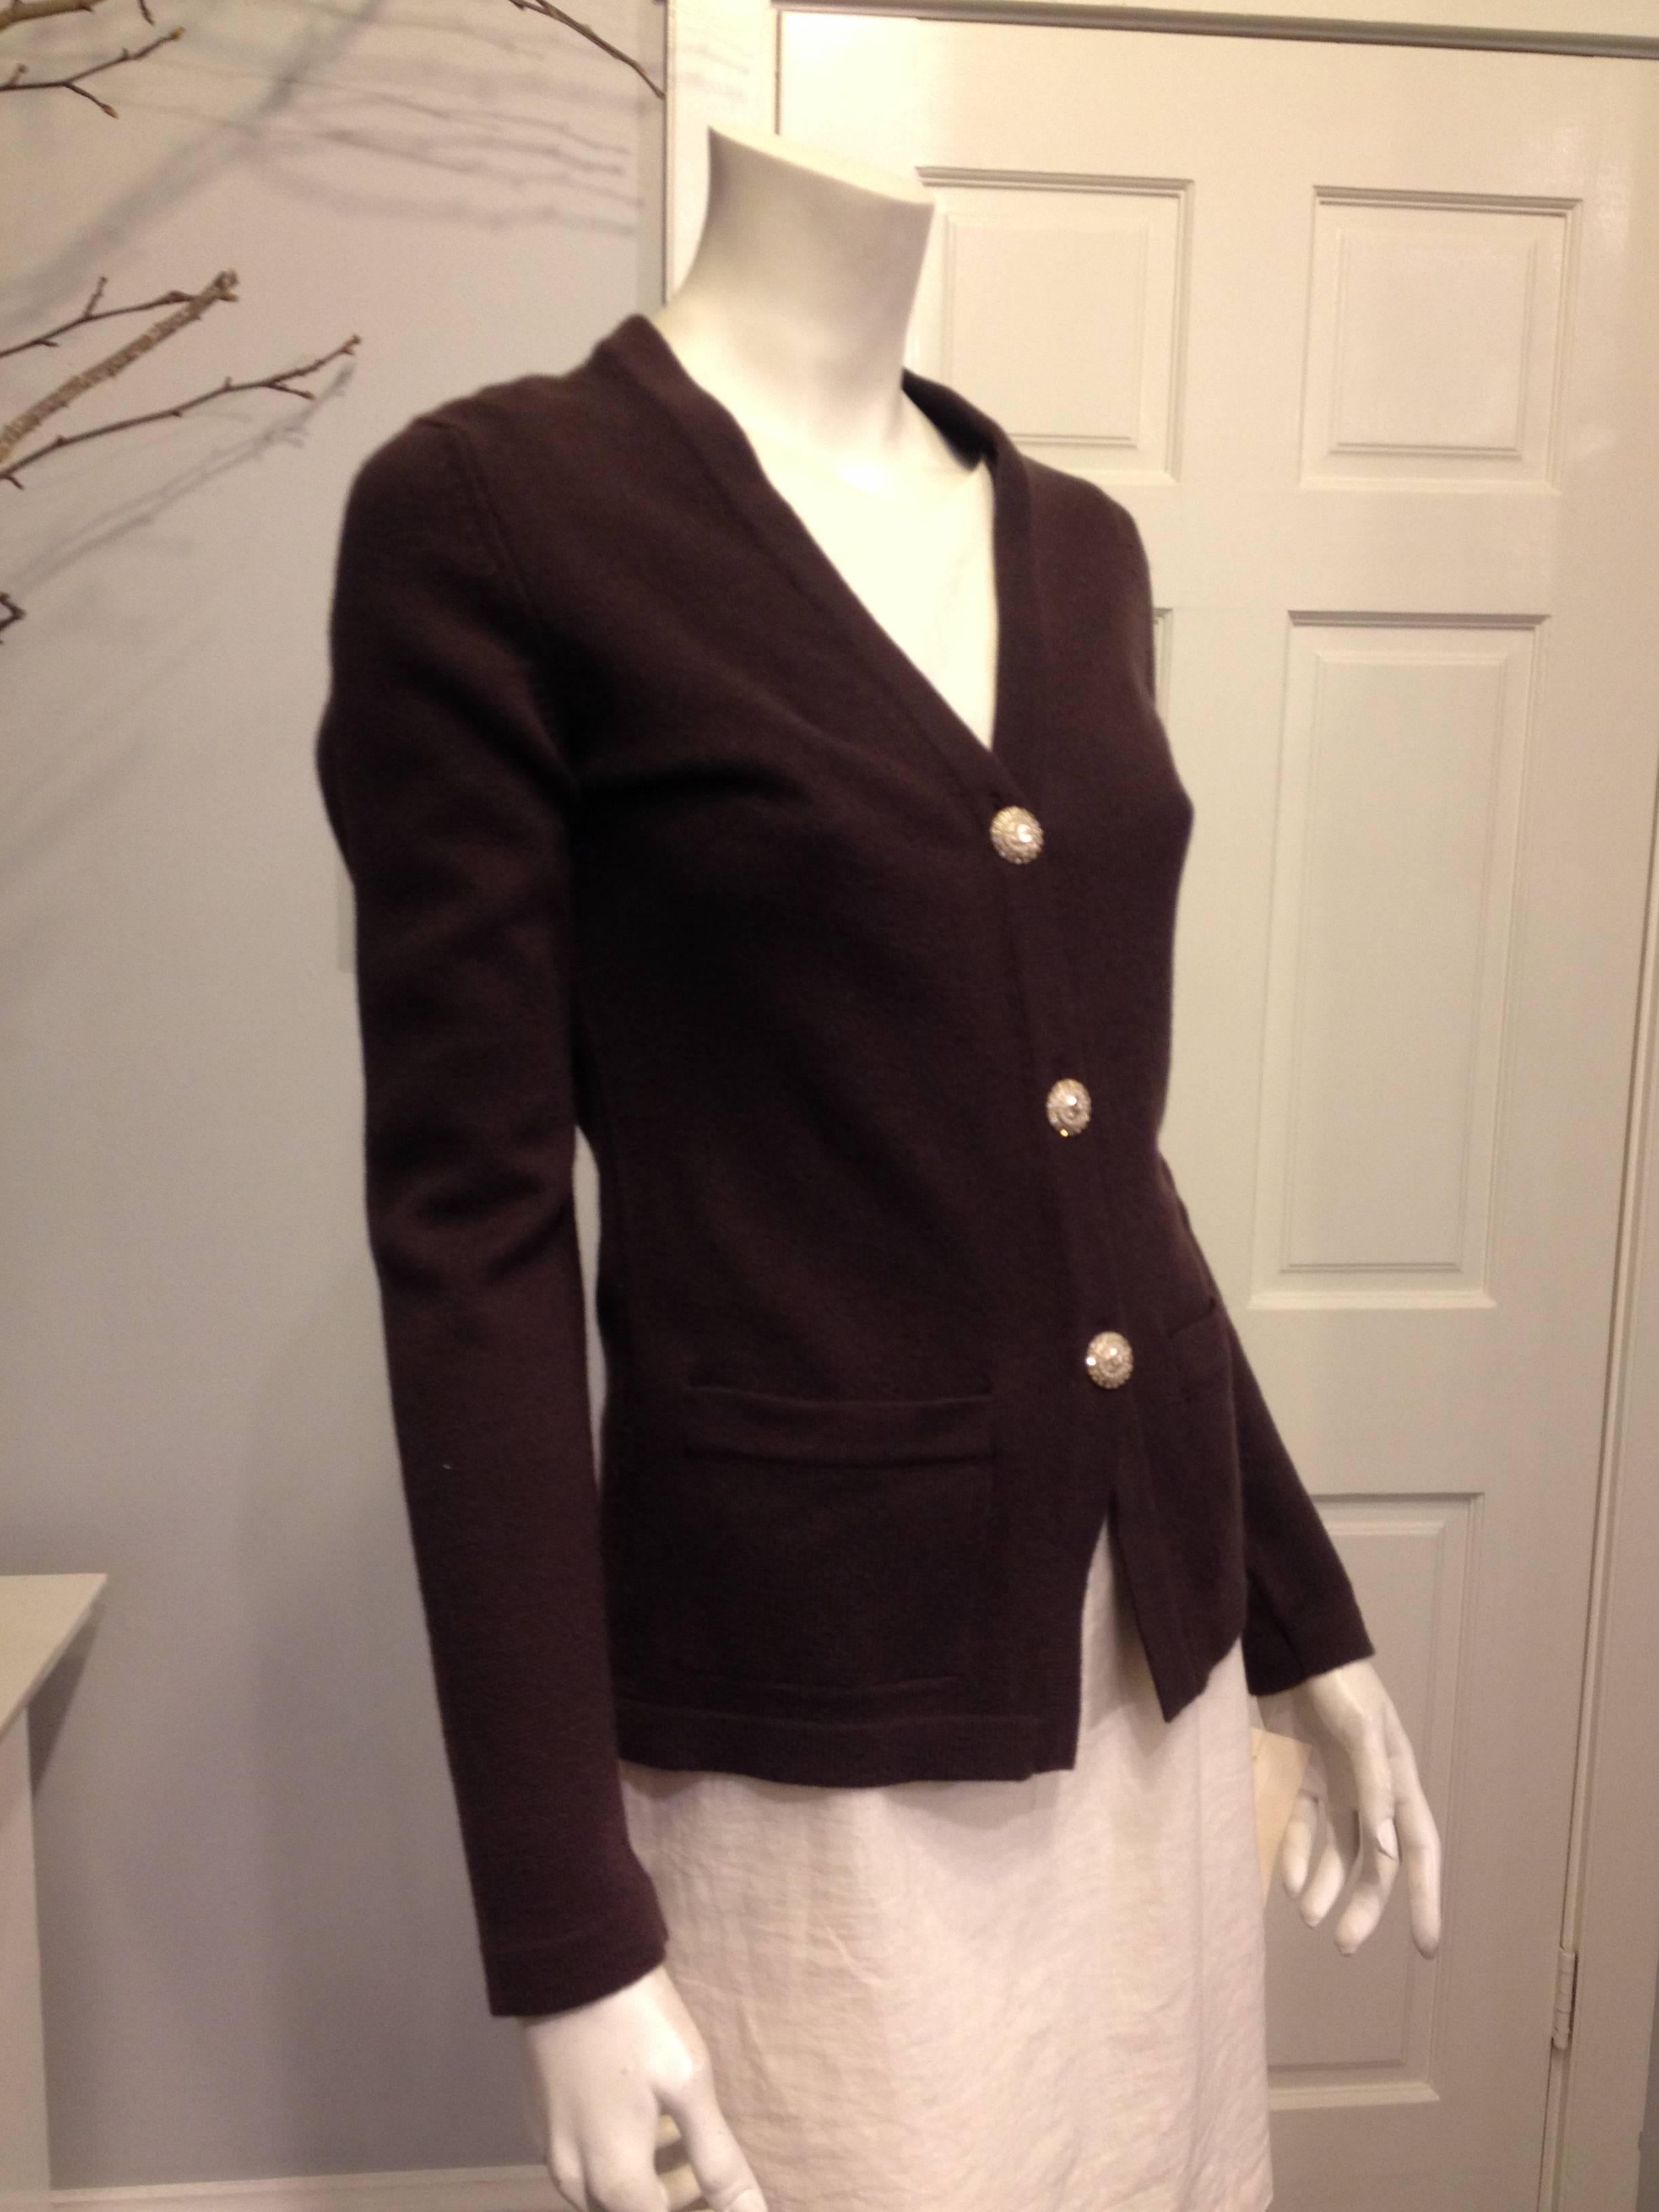 There's nothing more perfectly easy than a cashmere cardigan from Chanel. Dark chocolate brown is casual and versatile, while the rhinestone double C buttons add a dressy touch. The v-neck, long sleeves, and slim cut body is ideal for layering. A